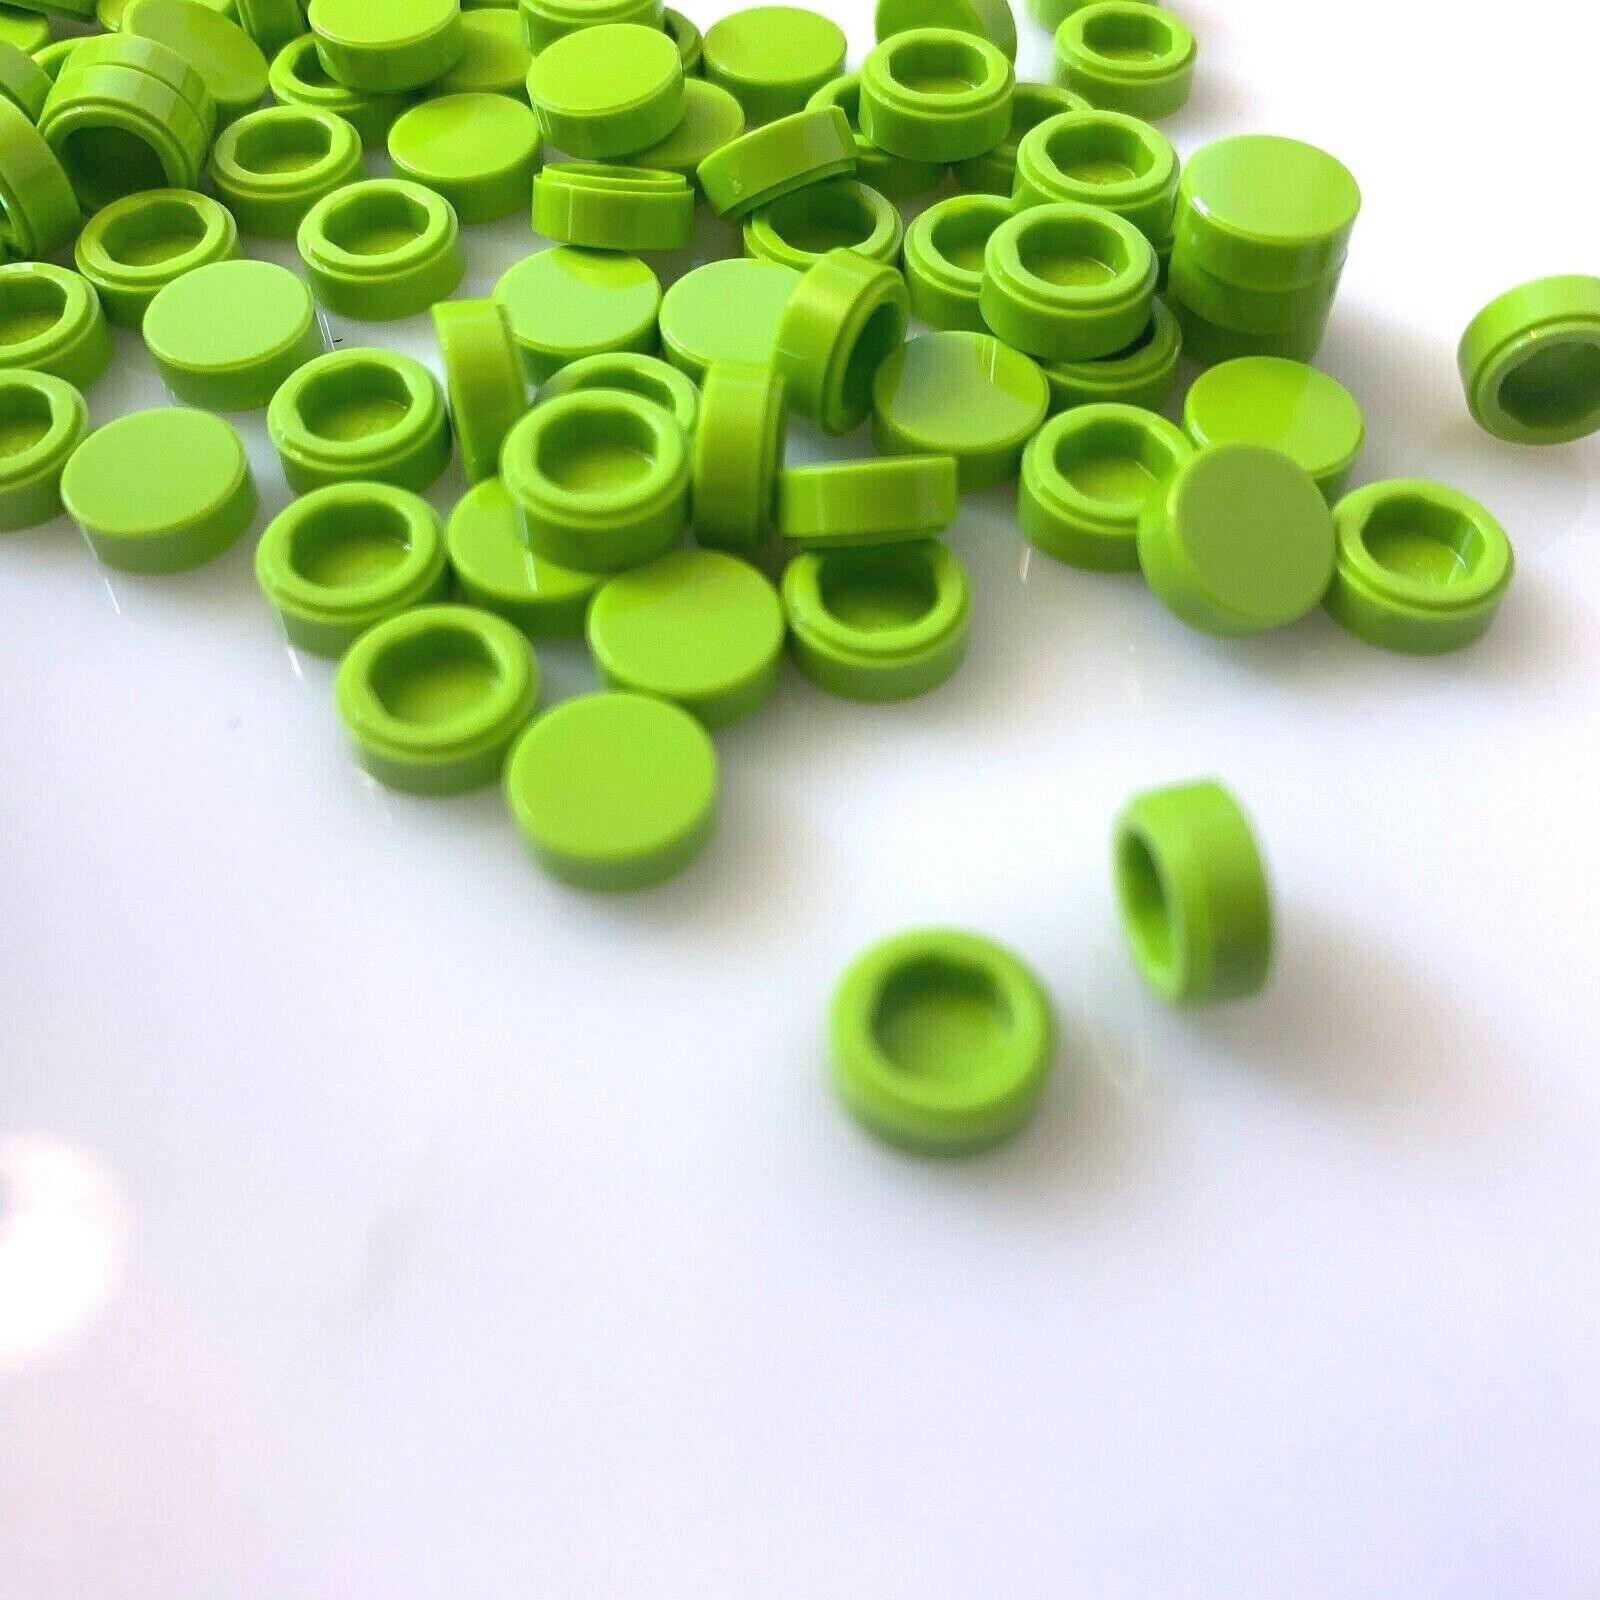 100 NEW LEGO Bright Yellowish Green (Lime) FLAT TILE 1X1, ROUND  (35381/6284583)